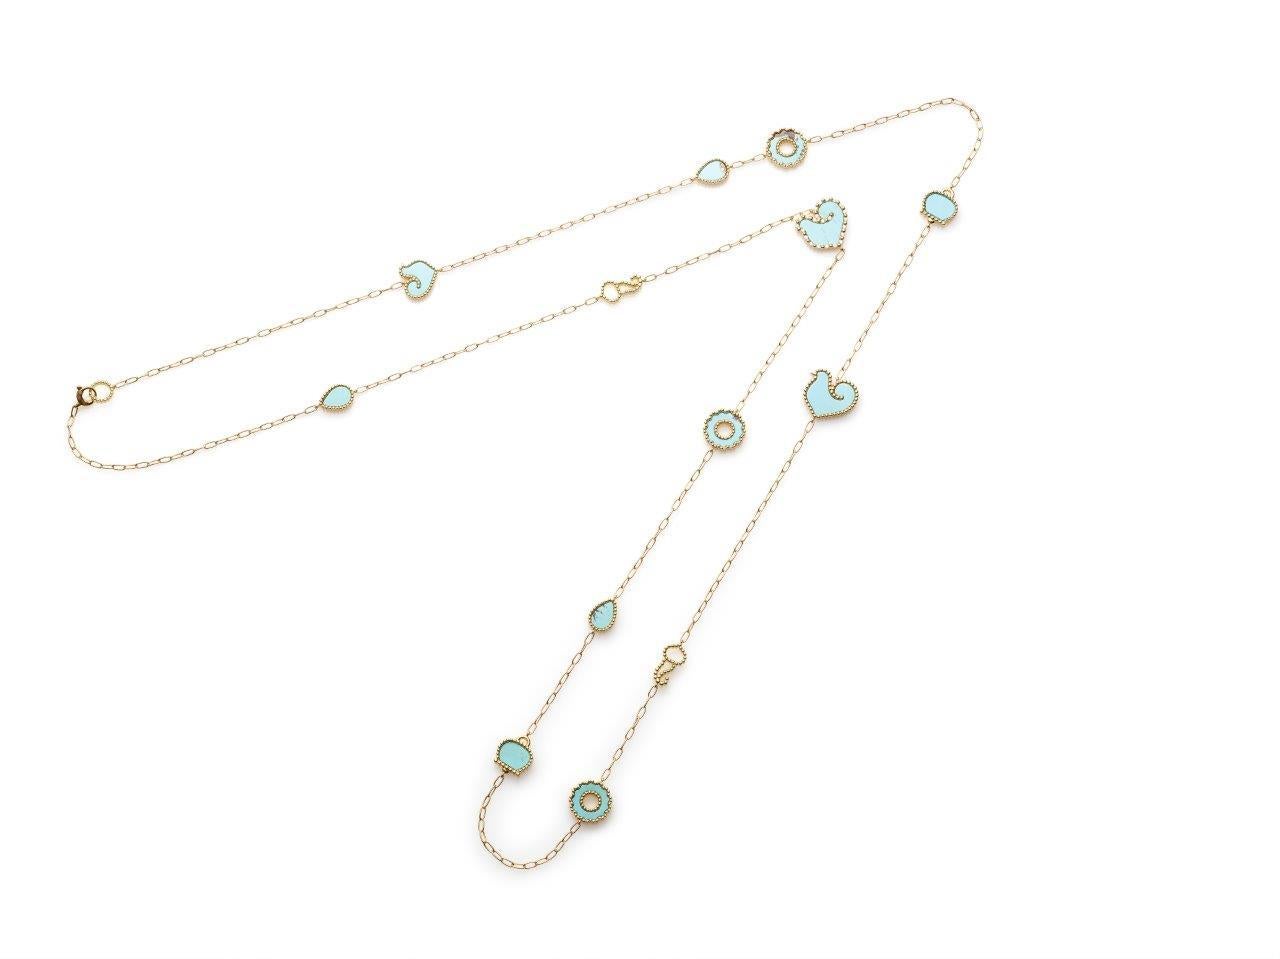 Contemporary Chantecler Anima 70 Turquoise Necklace